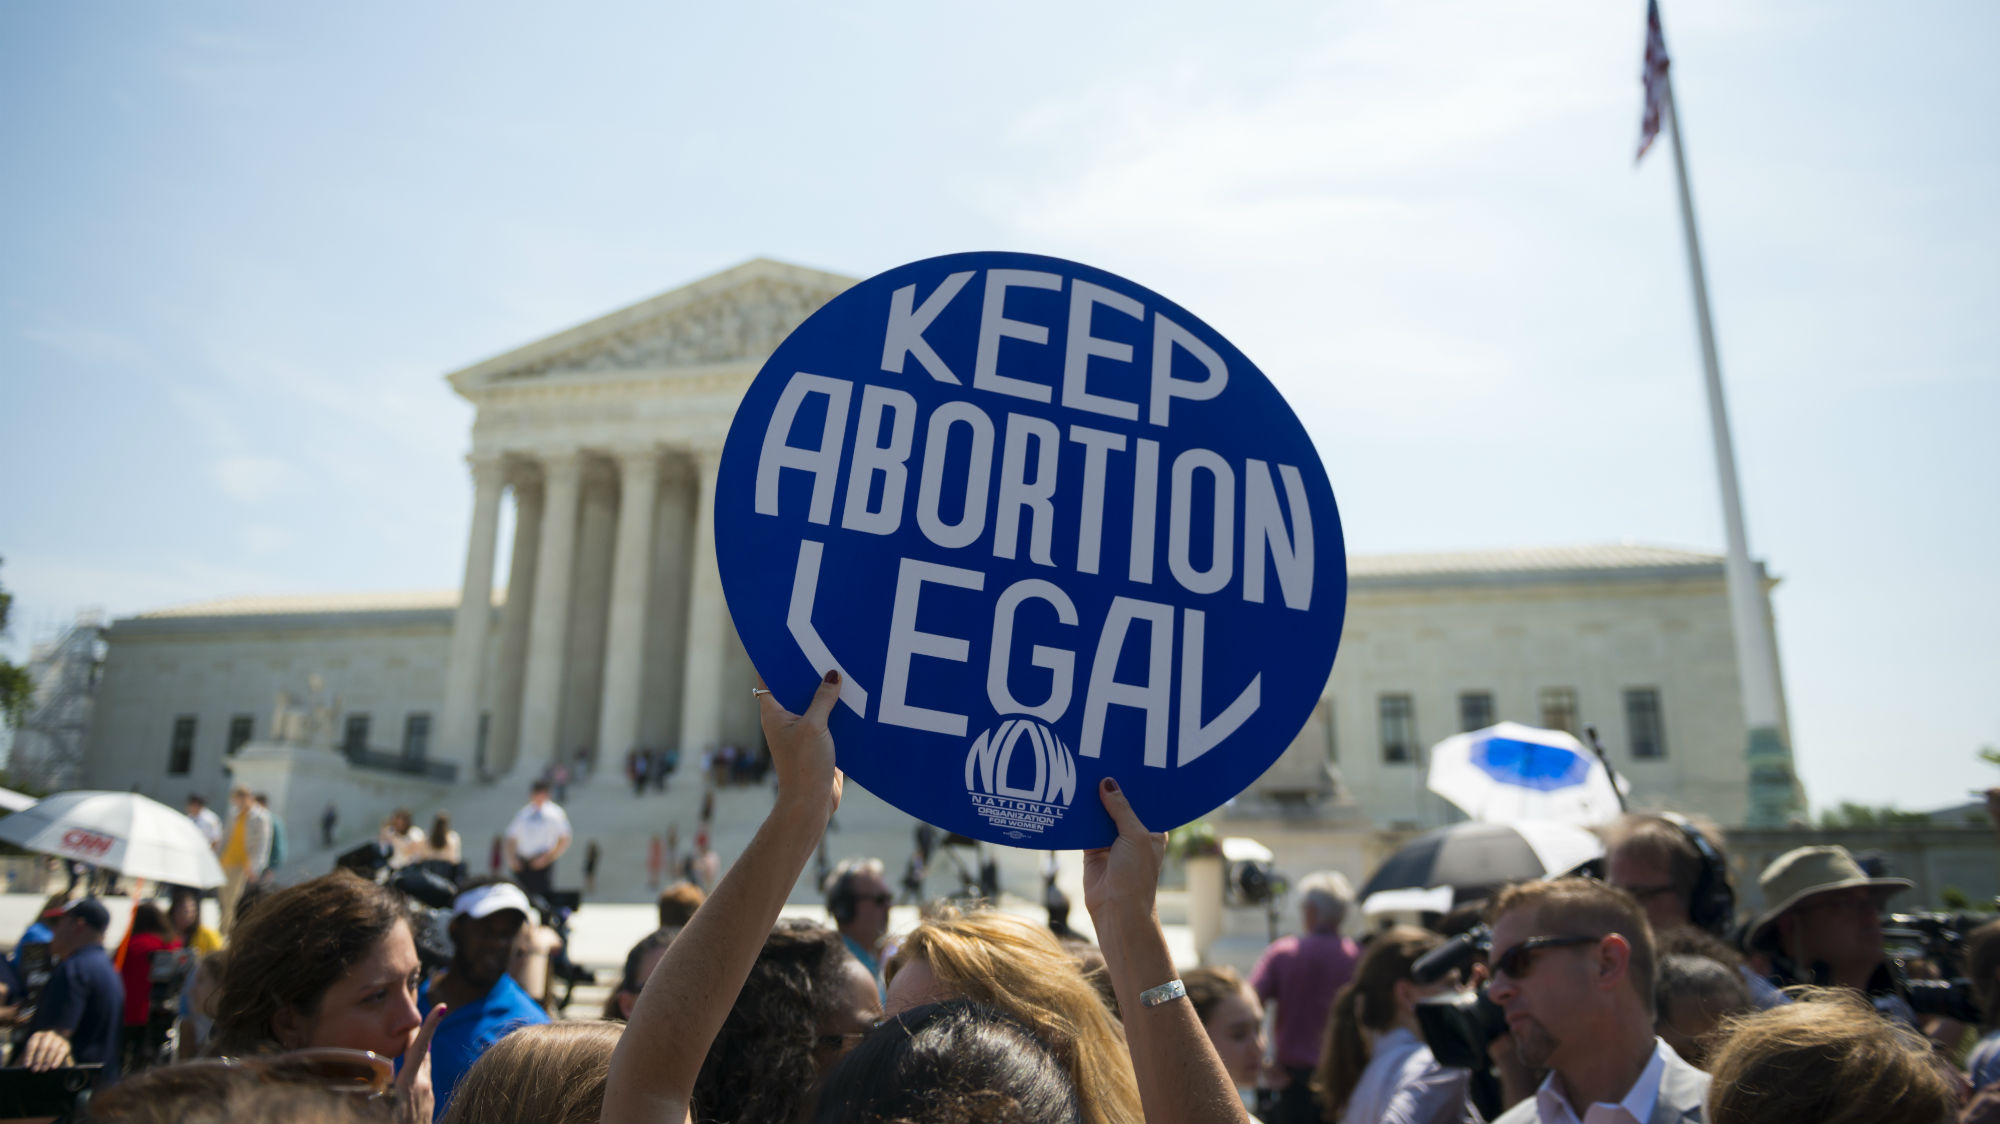 Overturning Roe v. Wade Could Affect Privacy Rights for Years to Come